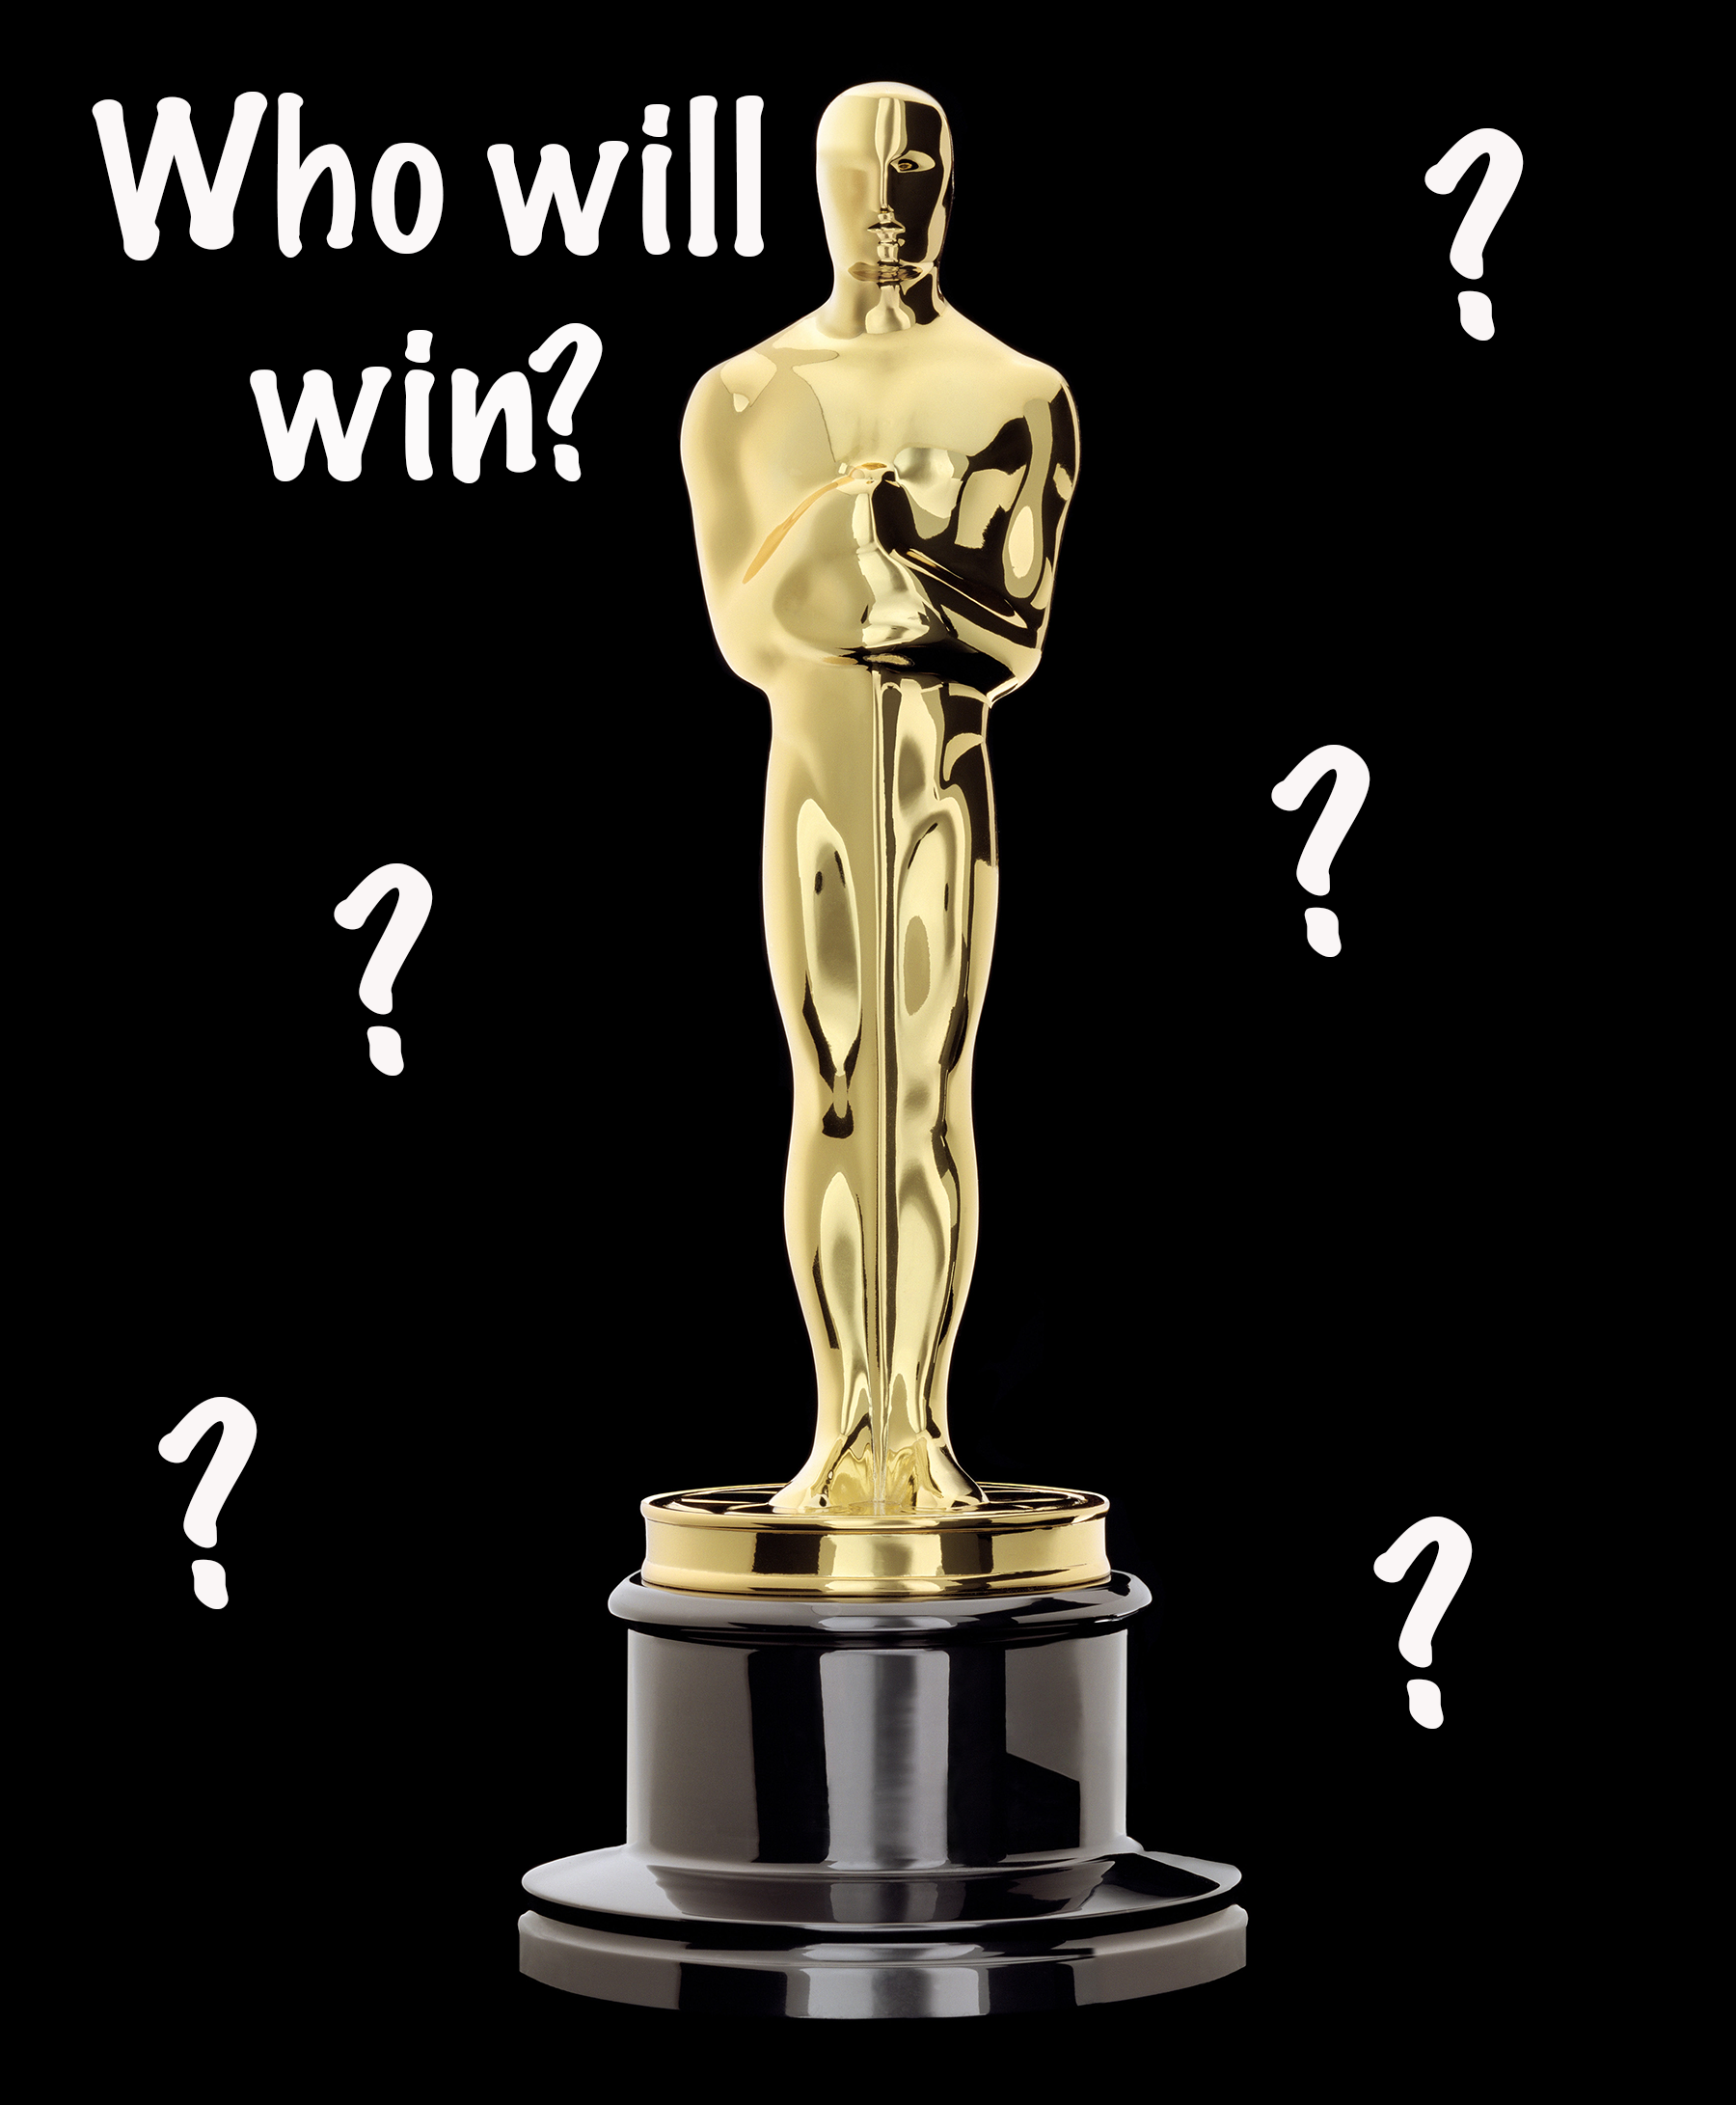 Who do YOU think will win the Oscars?